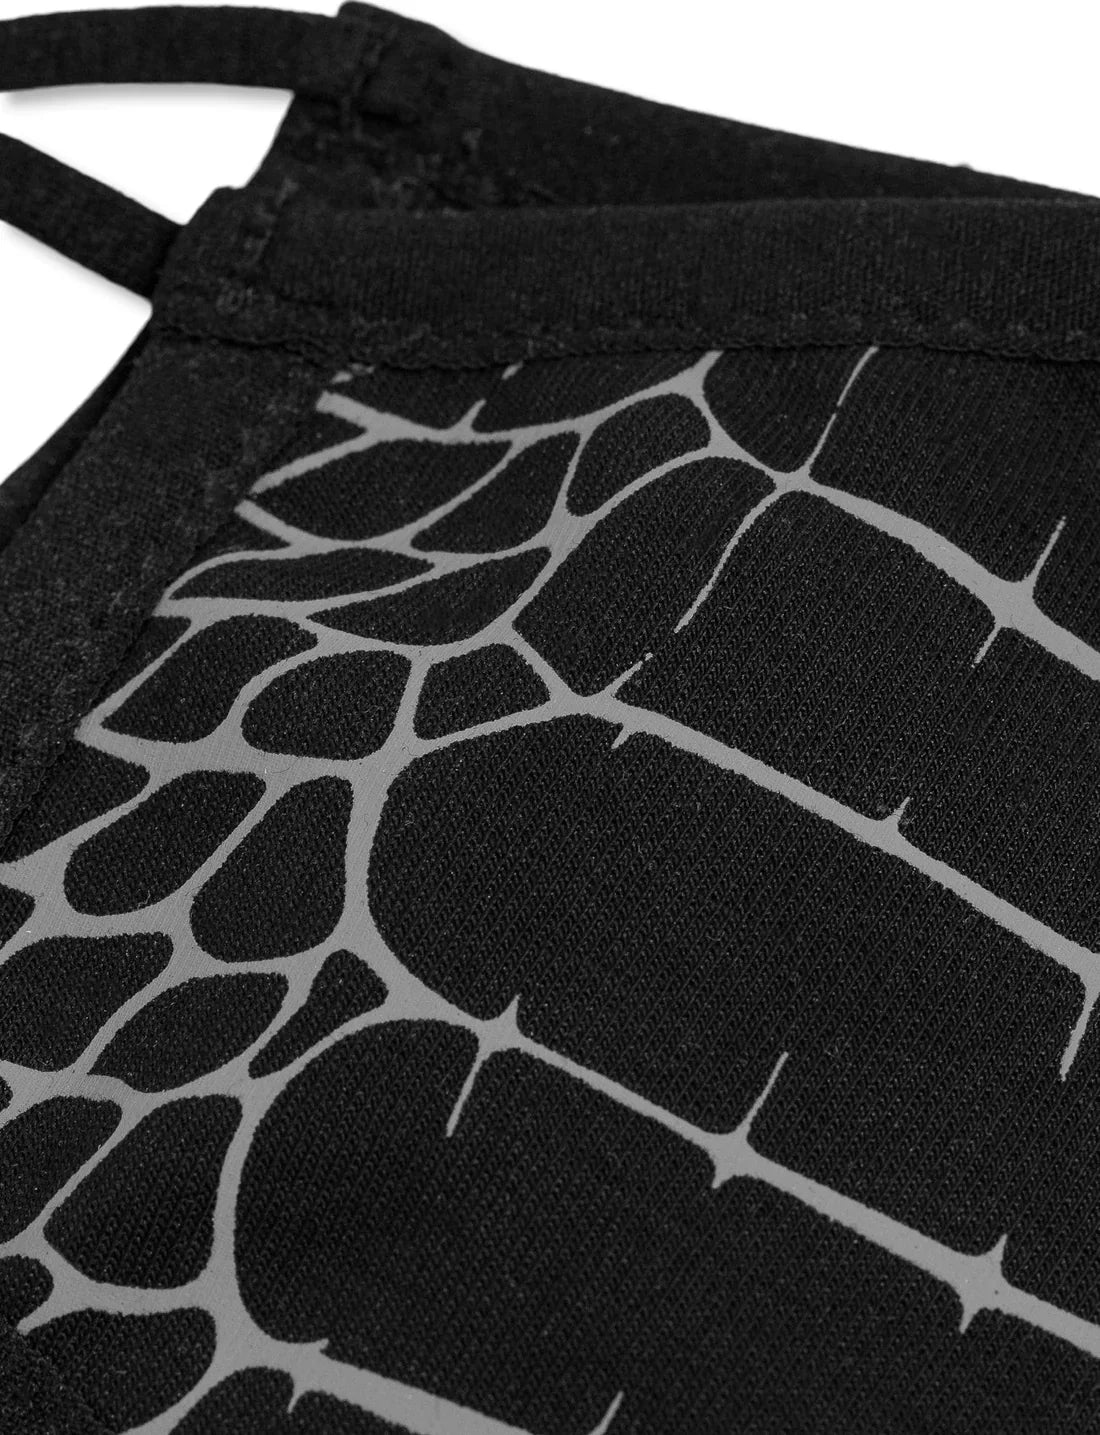 Detail of the reflective spider web design on a black face mask, highlighting the intricate pattern and texture, emphasizing the mask's unique aesthetic feature.